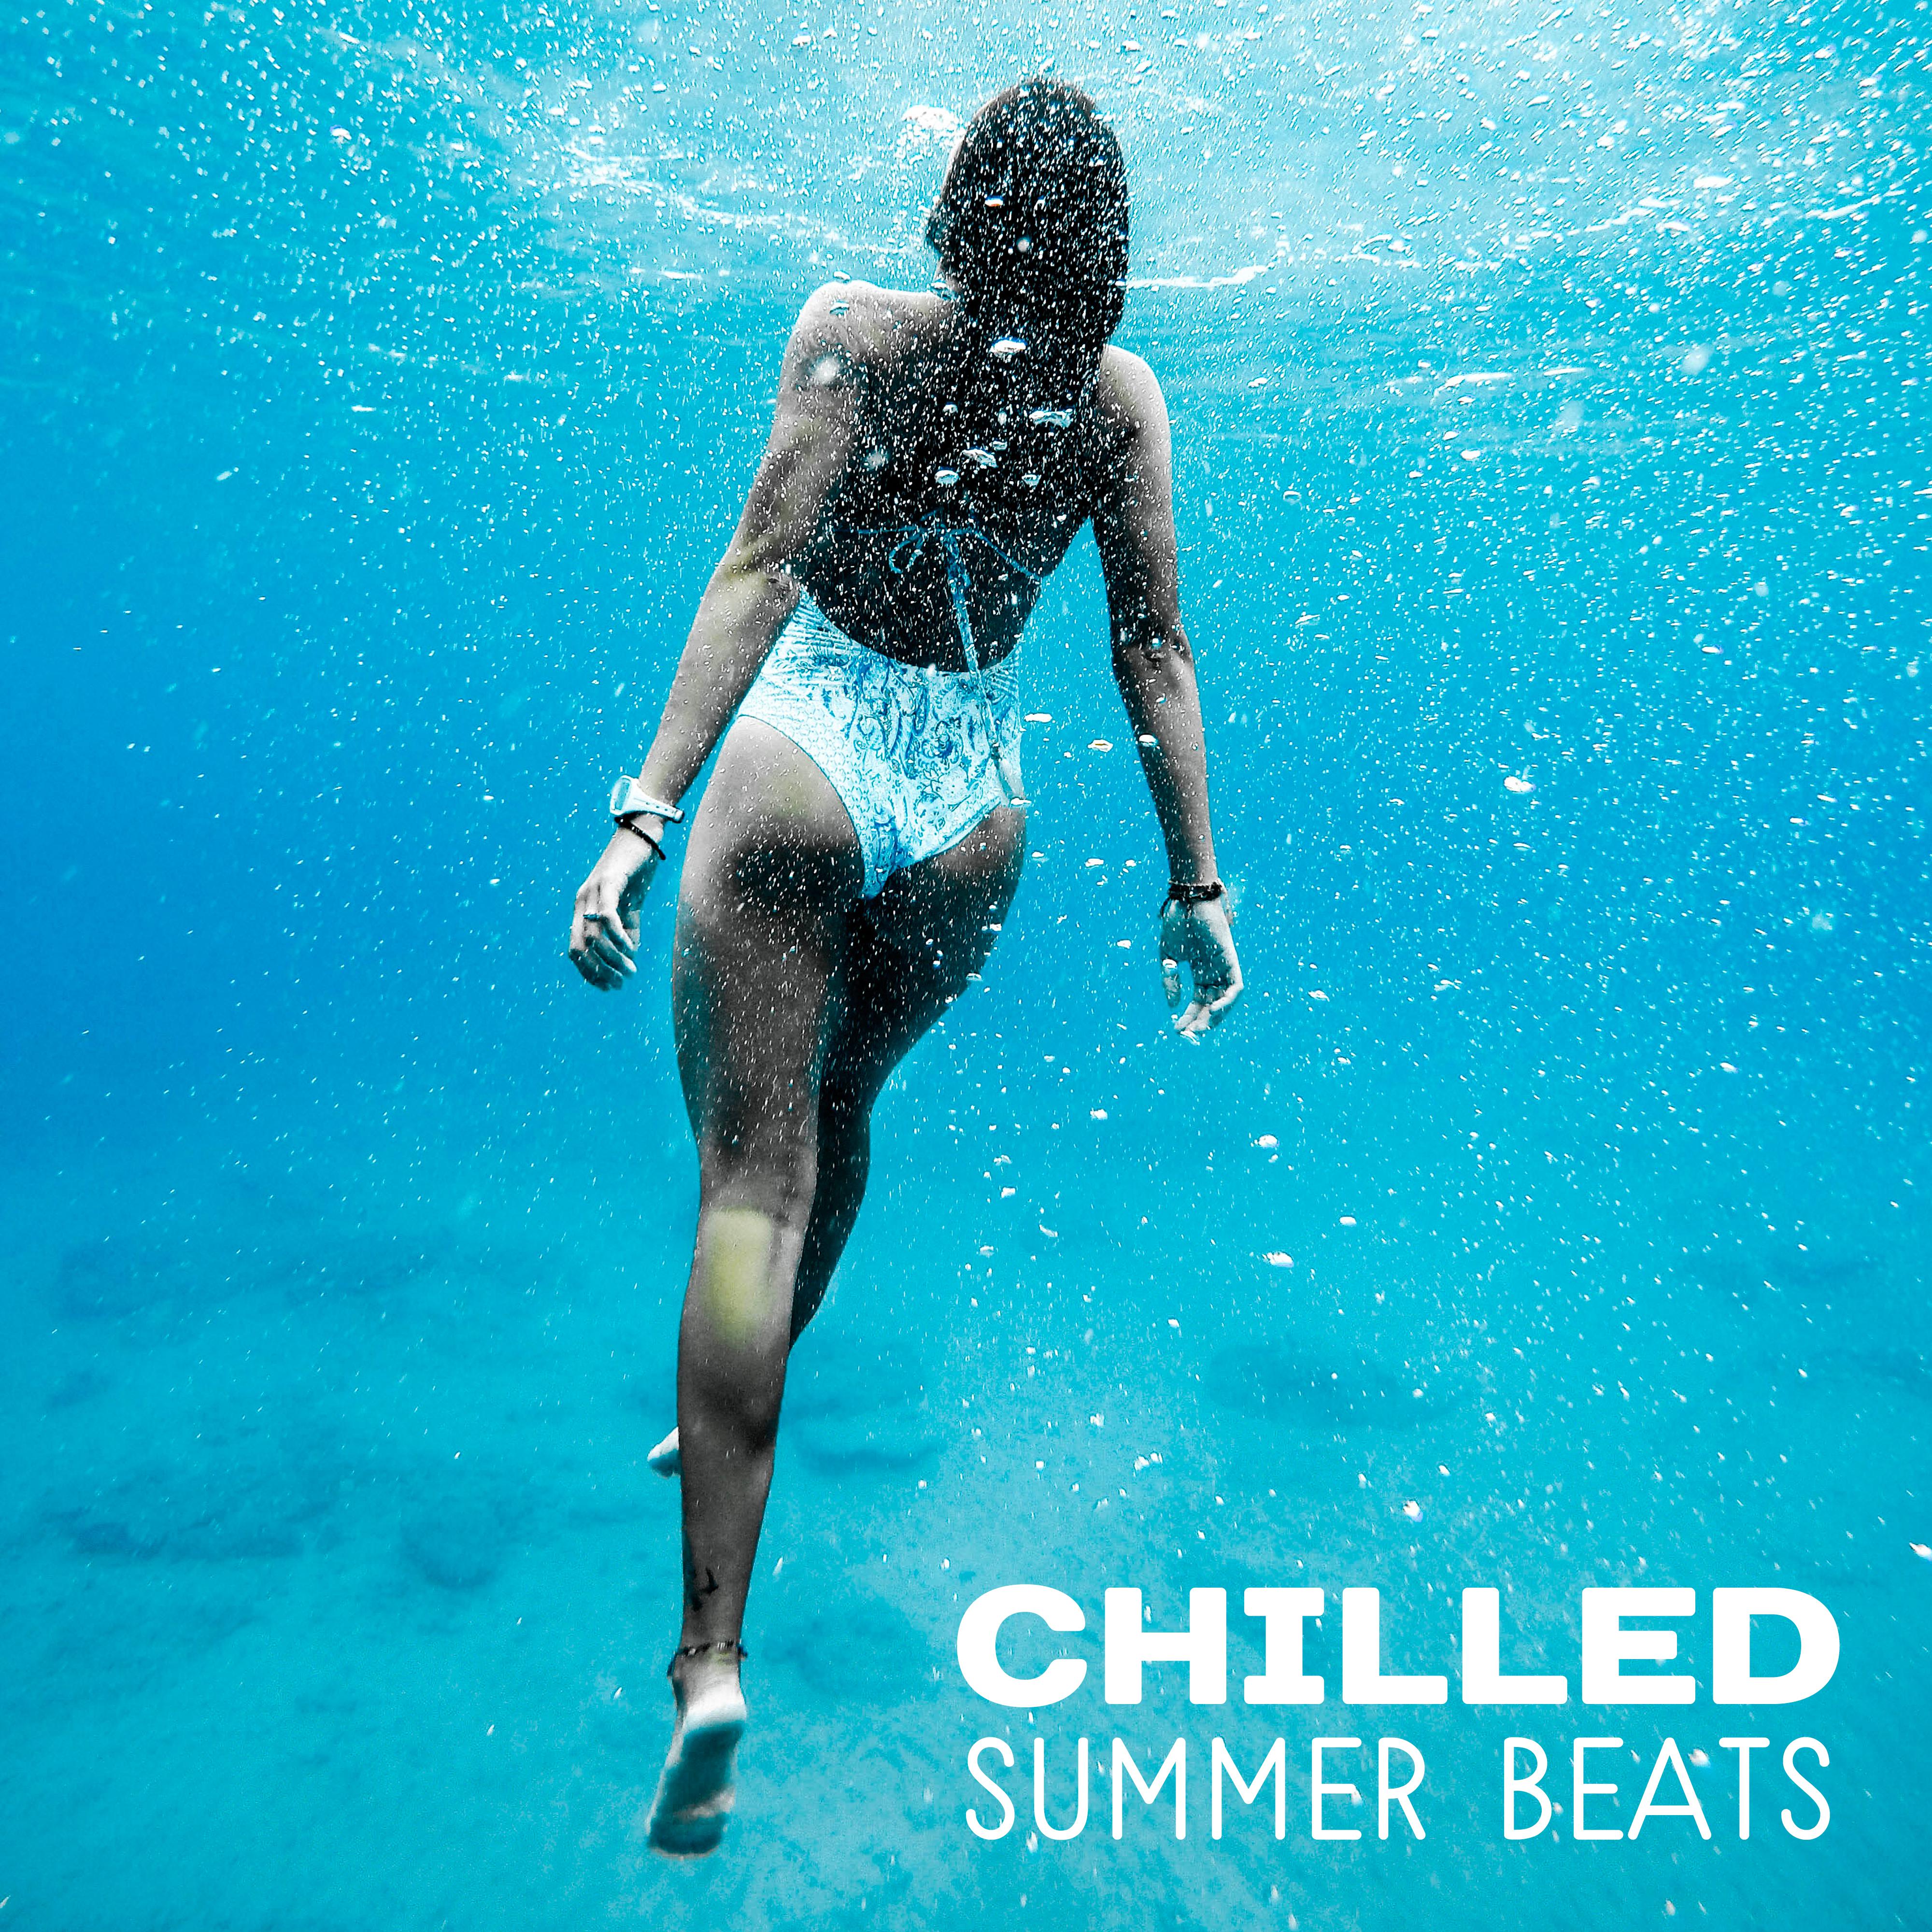 Chilled Summer Beats – Peaceful Vibes, Music to Relax, Holiday Melodies for Summertime, Beach Lounge